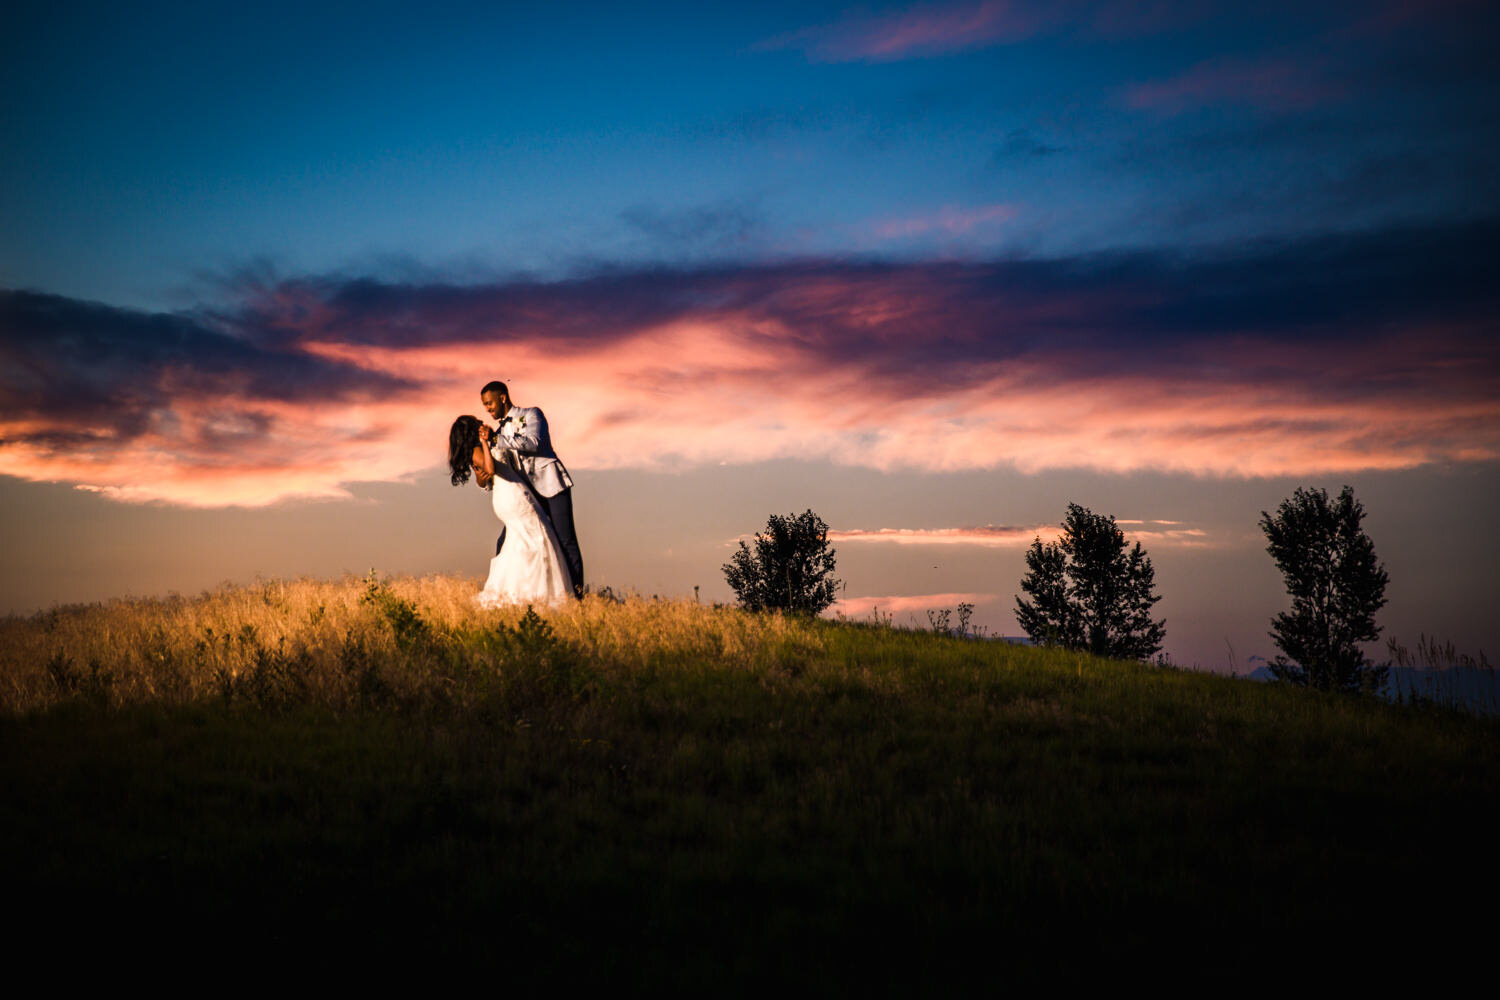  Rich and Paige's Wedding at Saddleback Golf Course in Firestone, Colorado
© JMGant Photography
http://www.jmgantphotography.com/ 